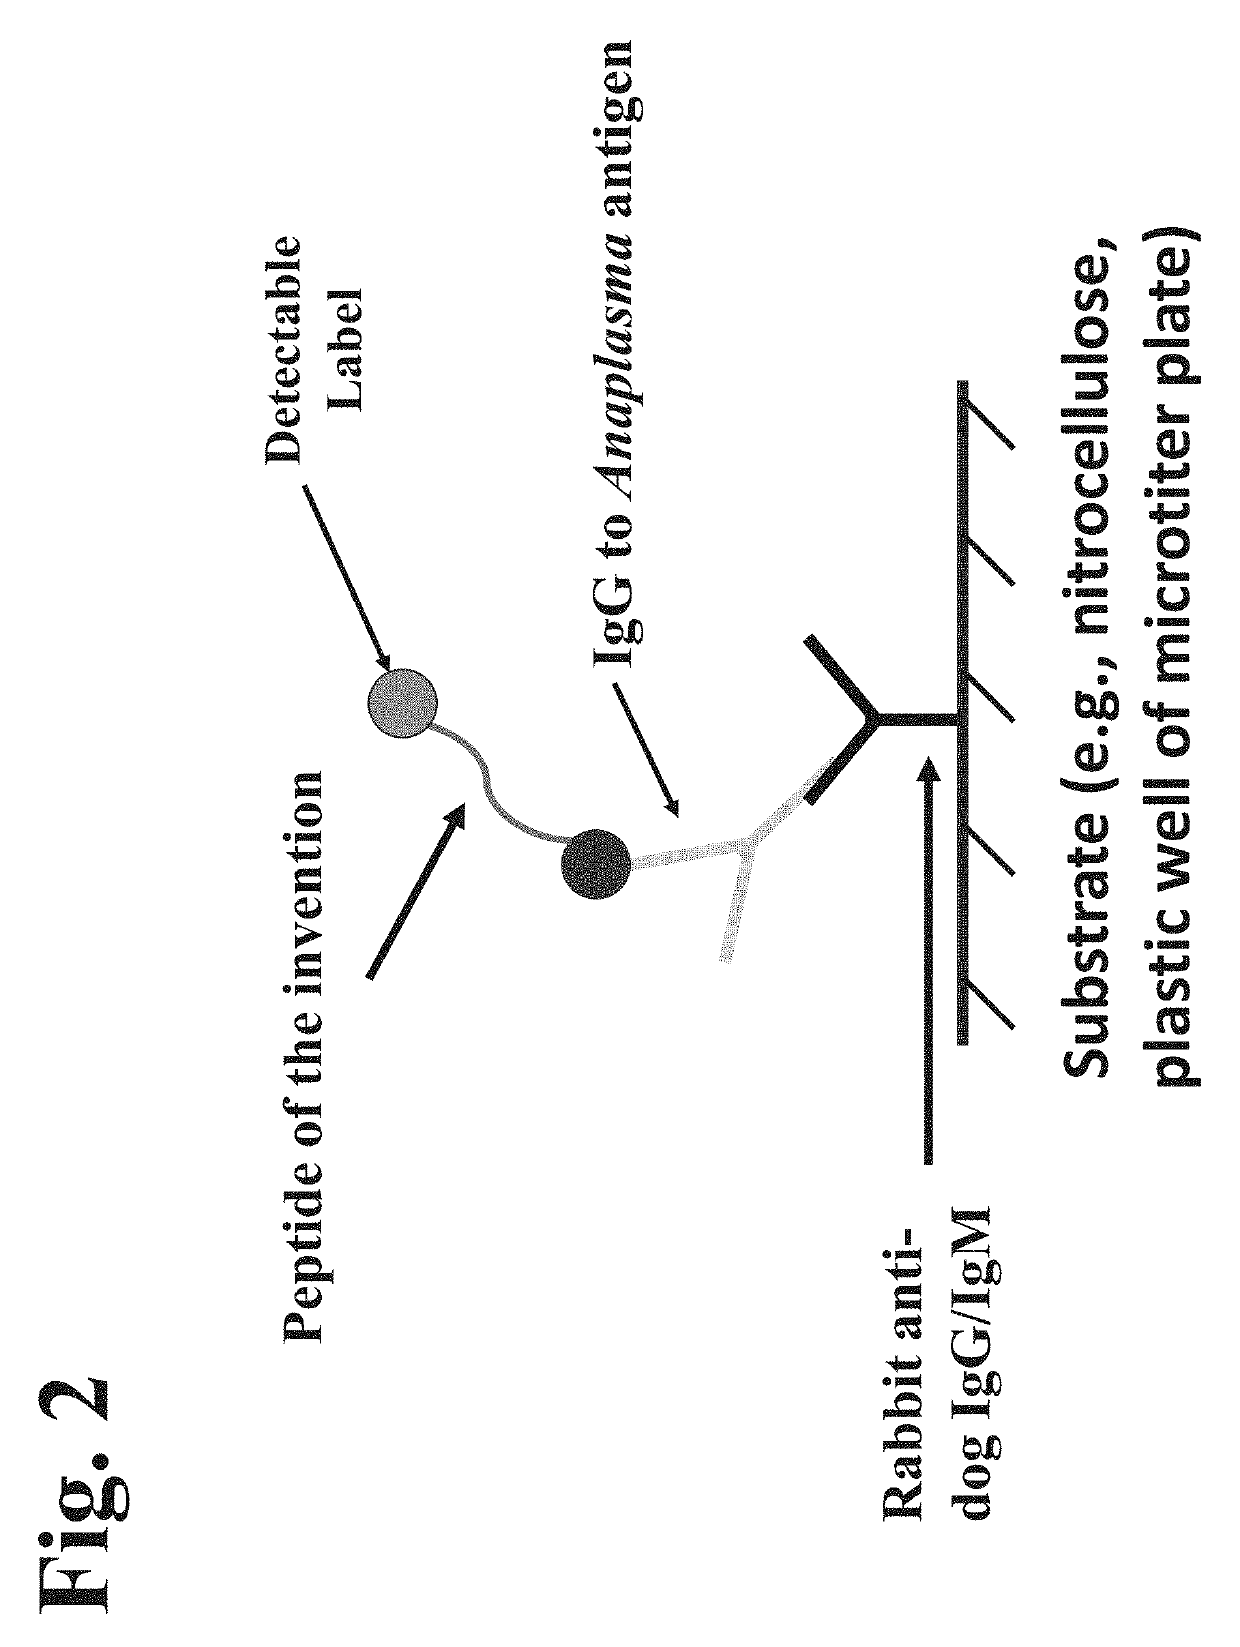 Peptides, devices, and methods for the detection of anaplasma antibodies